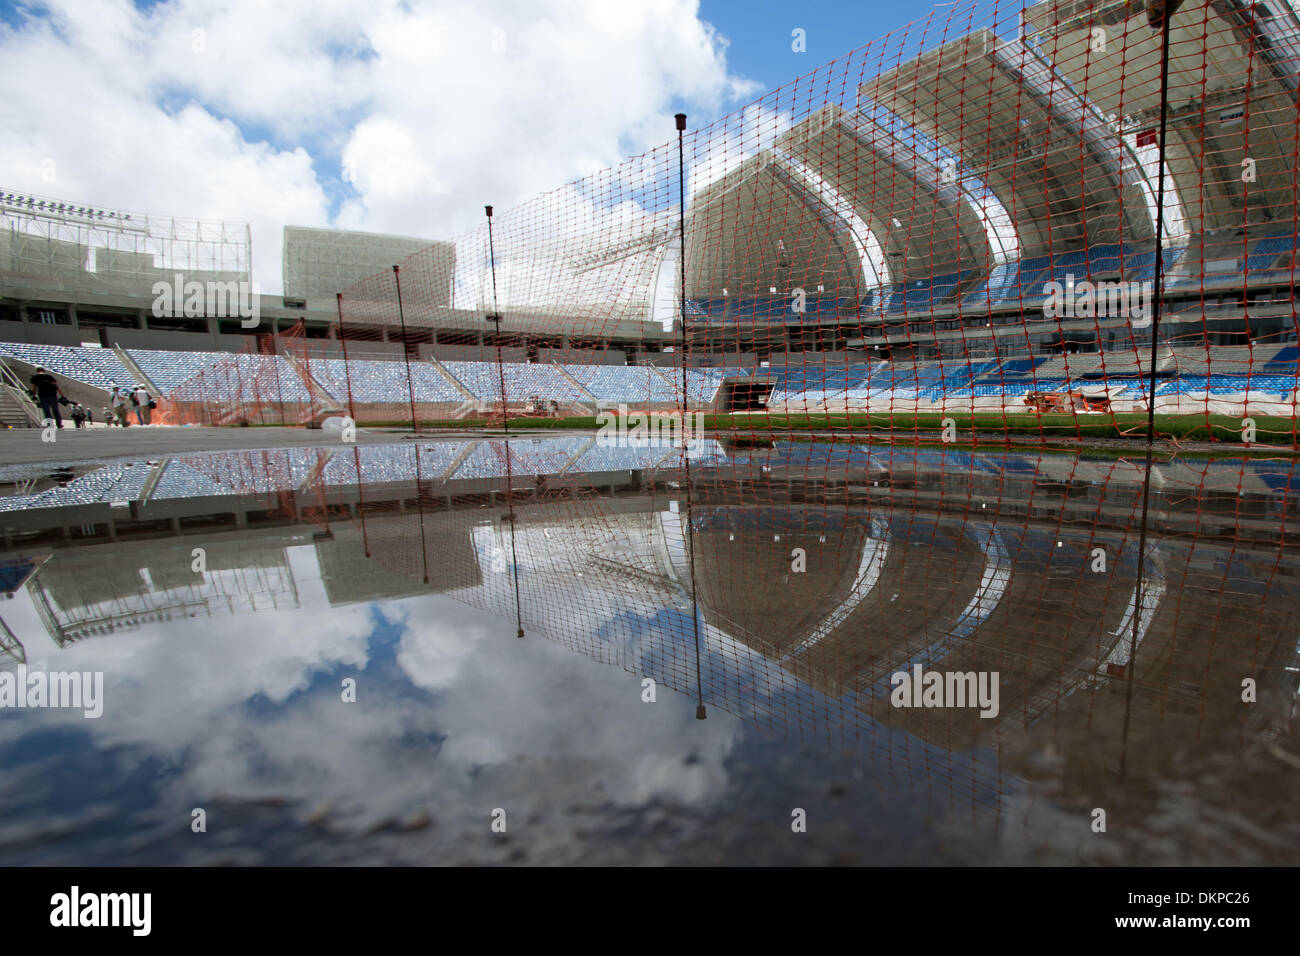 (131209) -- NATAL, Dec. 9, 2013 (Xinhua) -- Photo taken on Dec. 8, 2013 shows the interior view of Arena das Dunas in Natal, Rio Grande do Norte, Brazil. Arena das Dunas, which is scheduled to finish the reformation on Jan. 14, 2013, will hold four group matchs during the 2014 World Cup. (Xinhua/Xu Zijian) Stock Photo